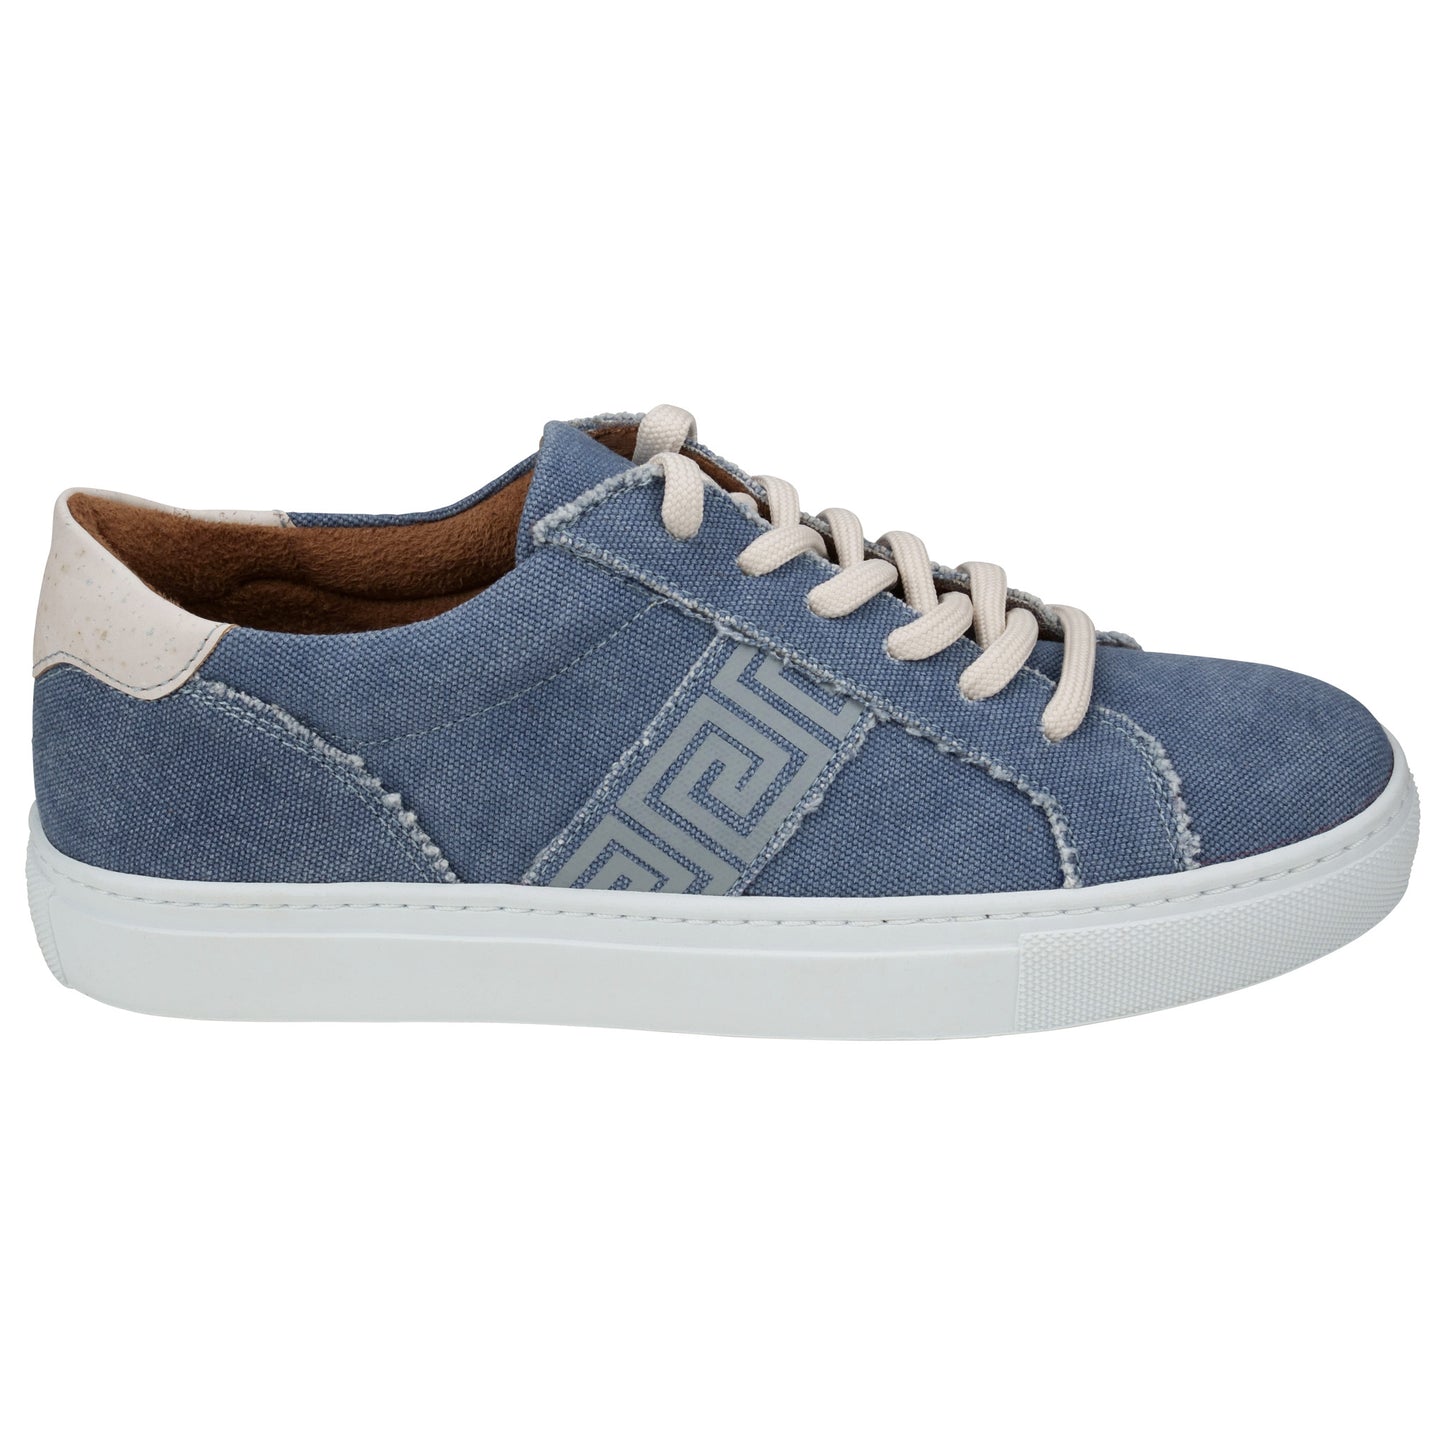 Close up side view denim sneaker with Greek key detail